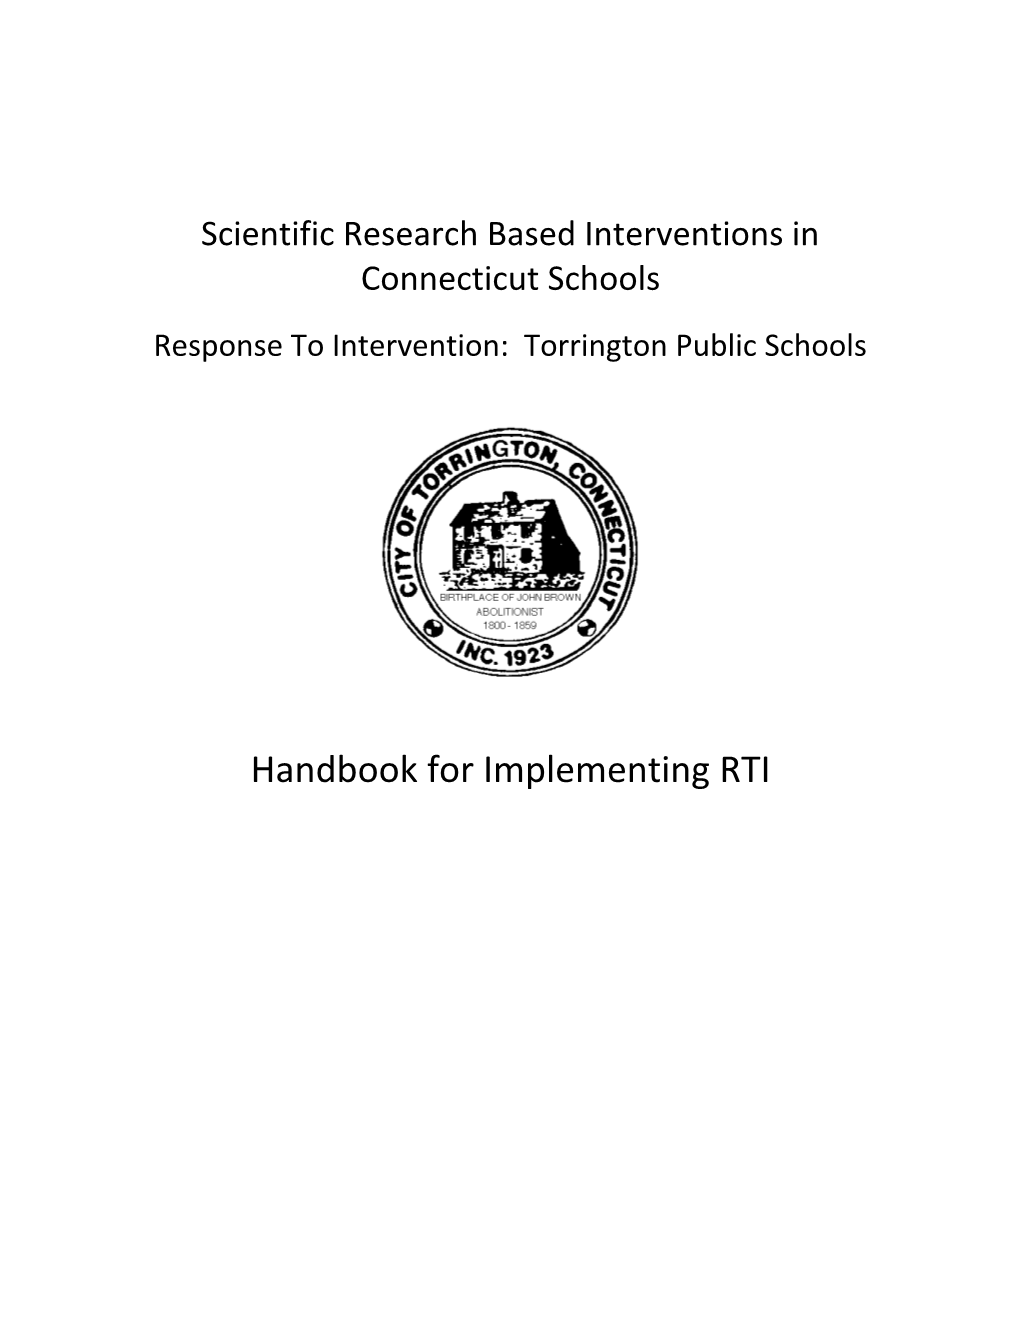 Scientific Research Based Interventions in Connecticut Schools